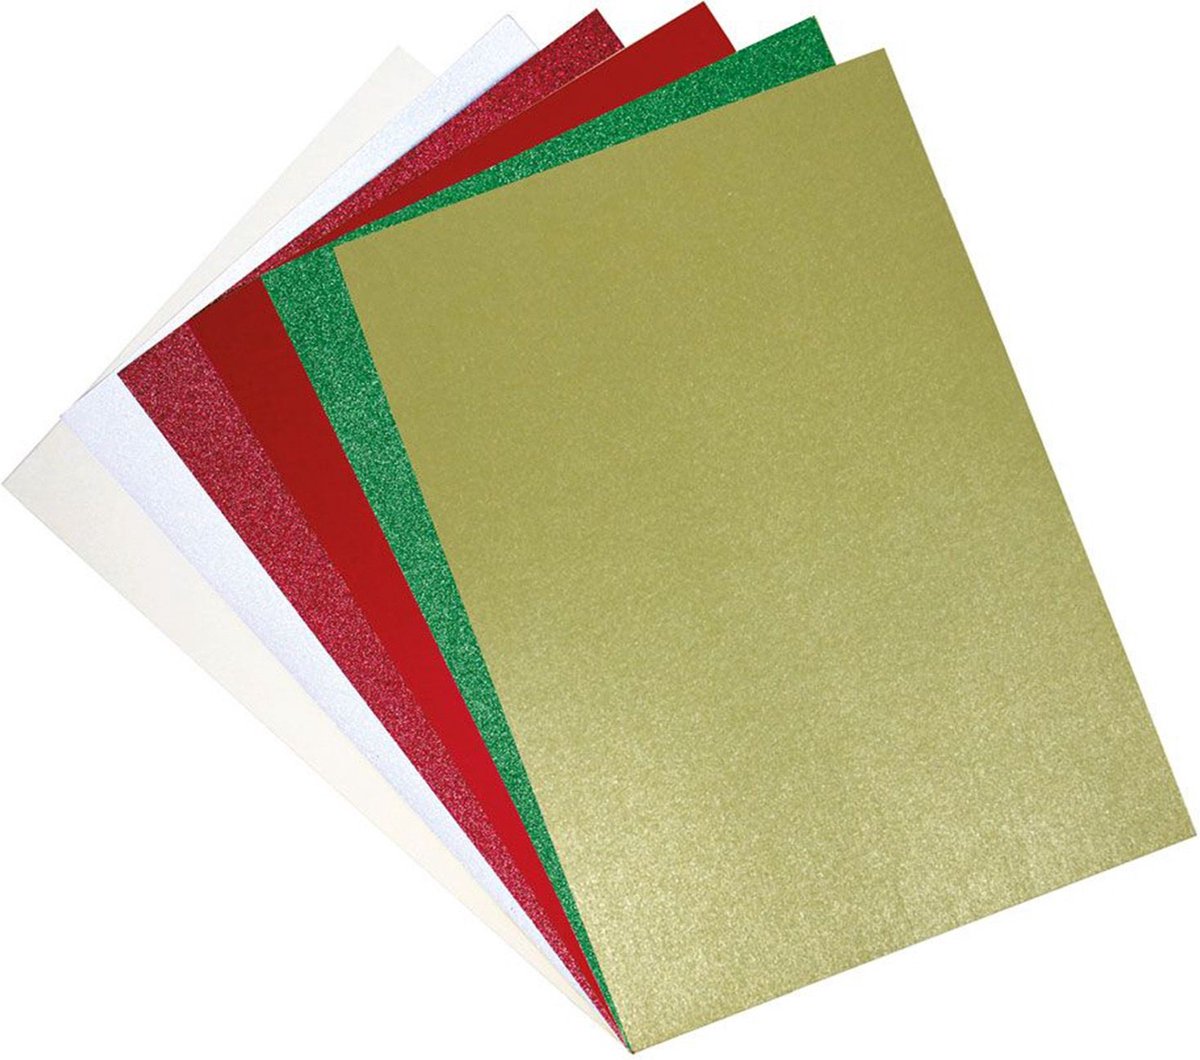 Sizzix Surfacez Cardstock Sheets Pearl & Glitter Festive A